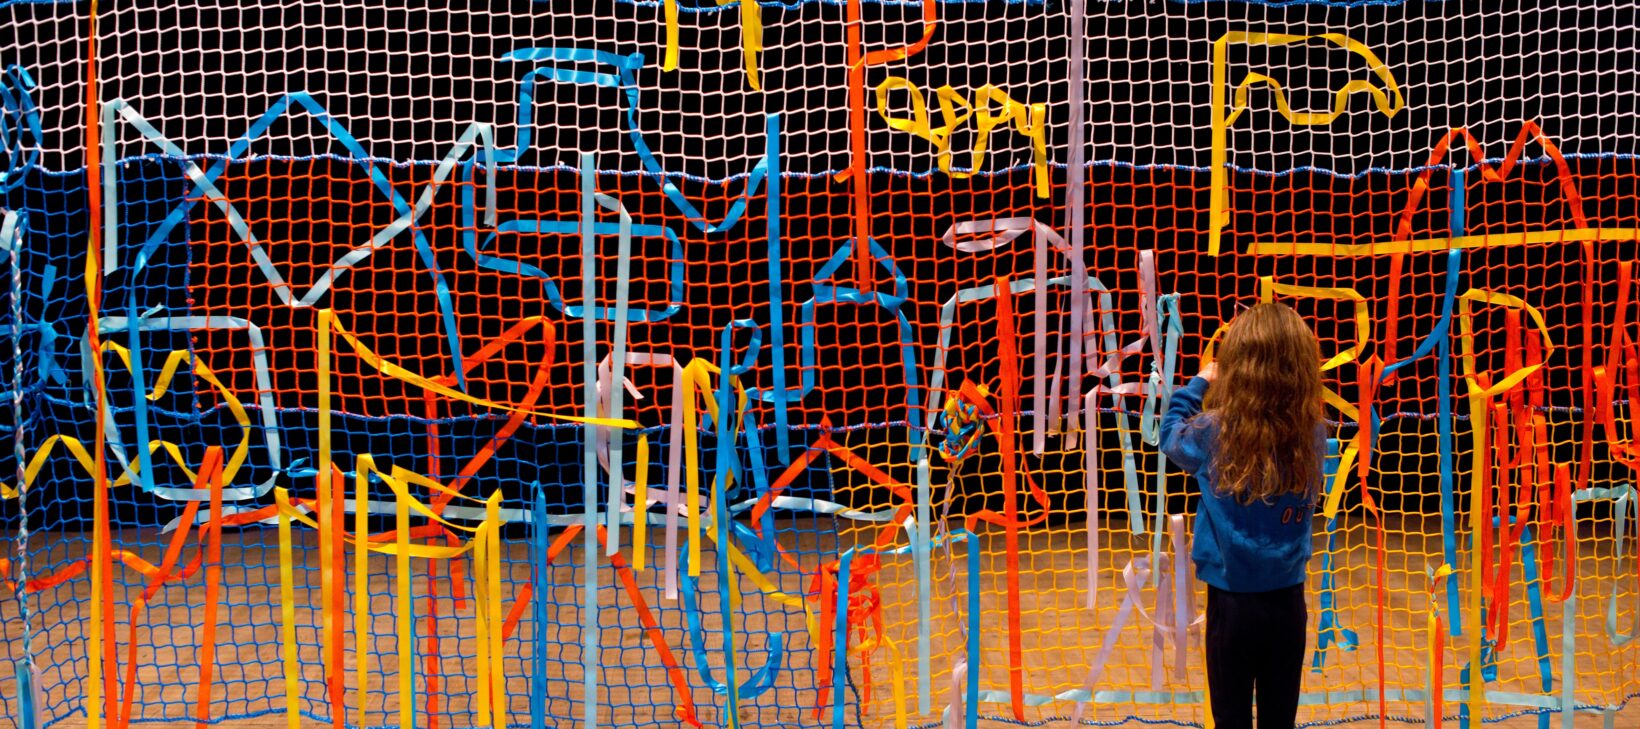 Image shows a lots of coloured fabric entangled in a large mesh wall. There is a young child with long brown hair with their back to the camera playing with the fabric.